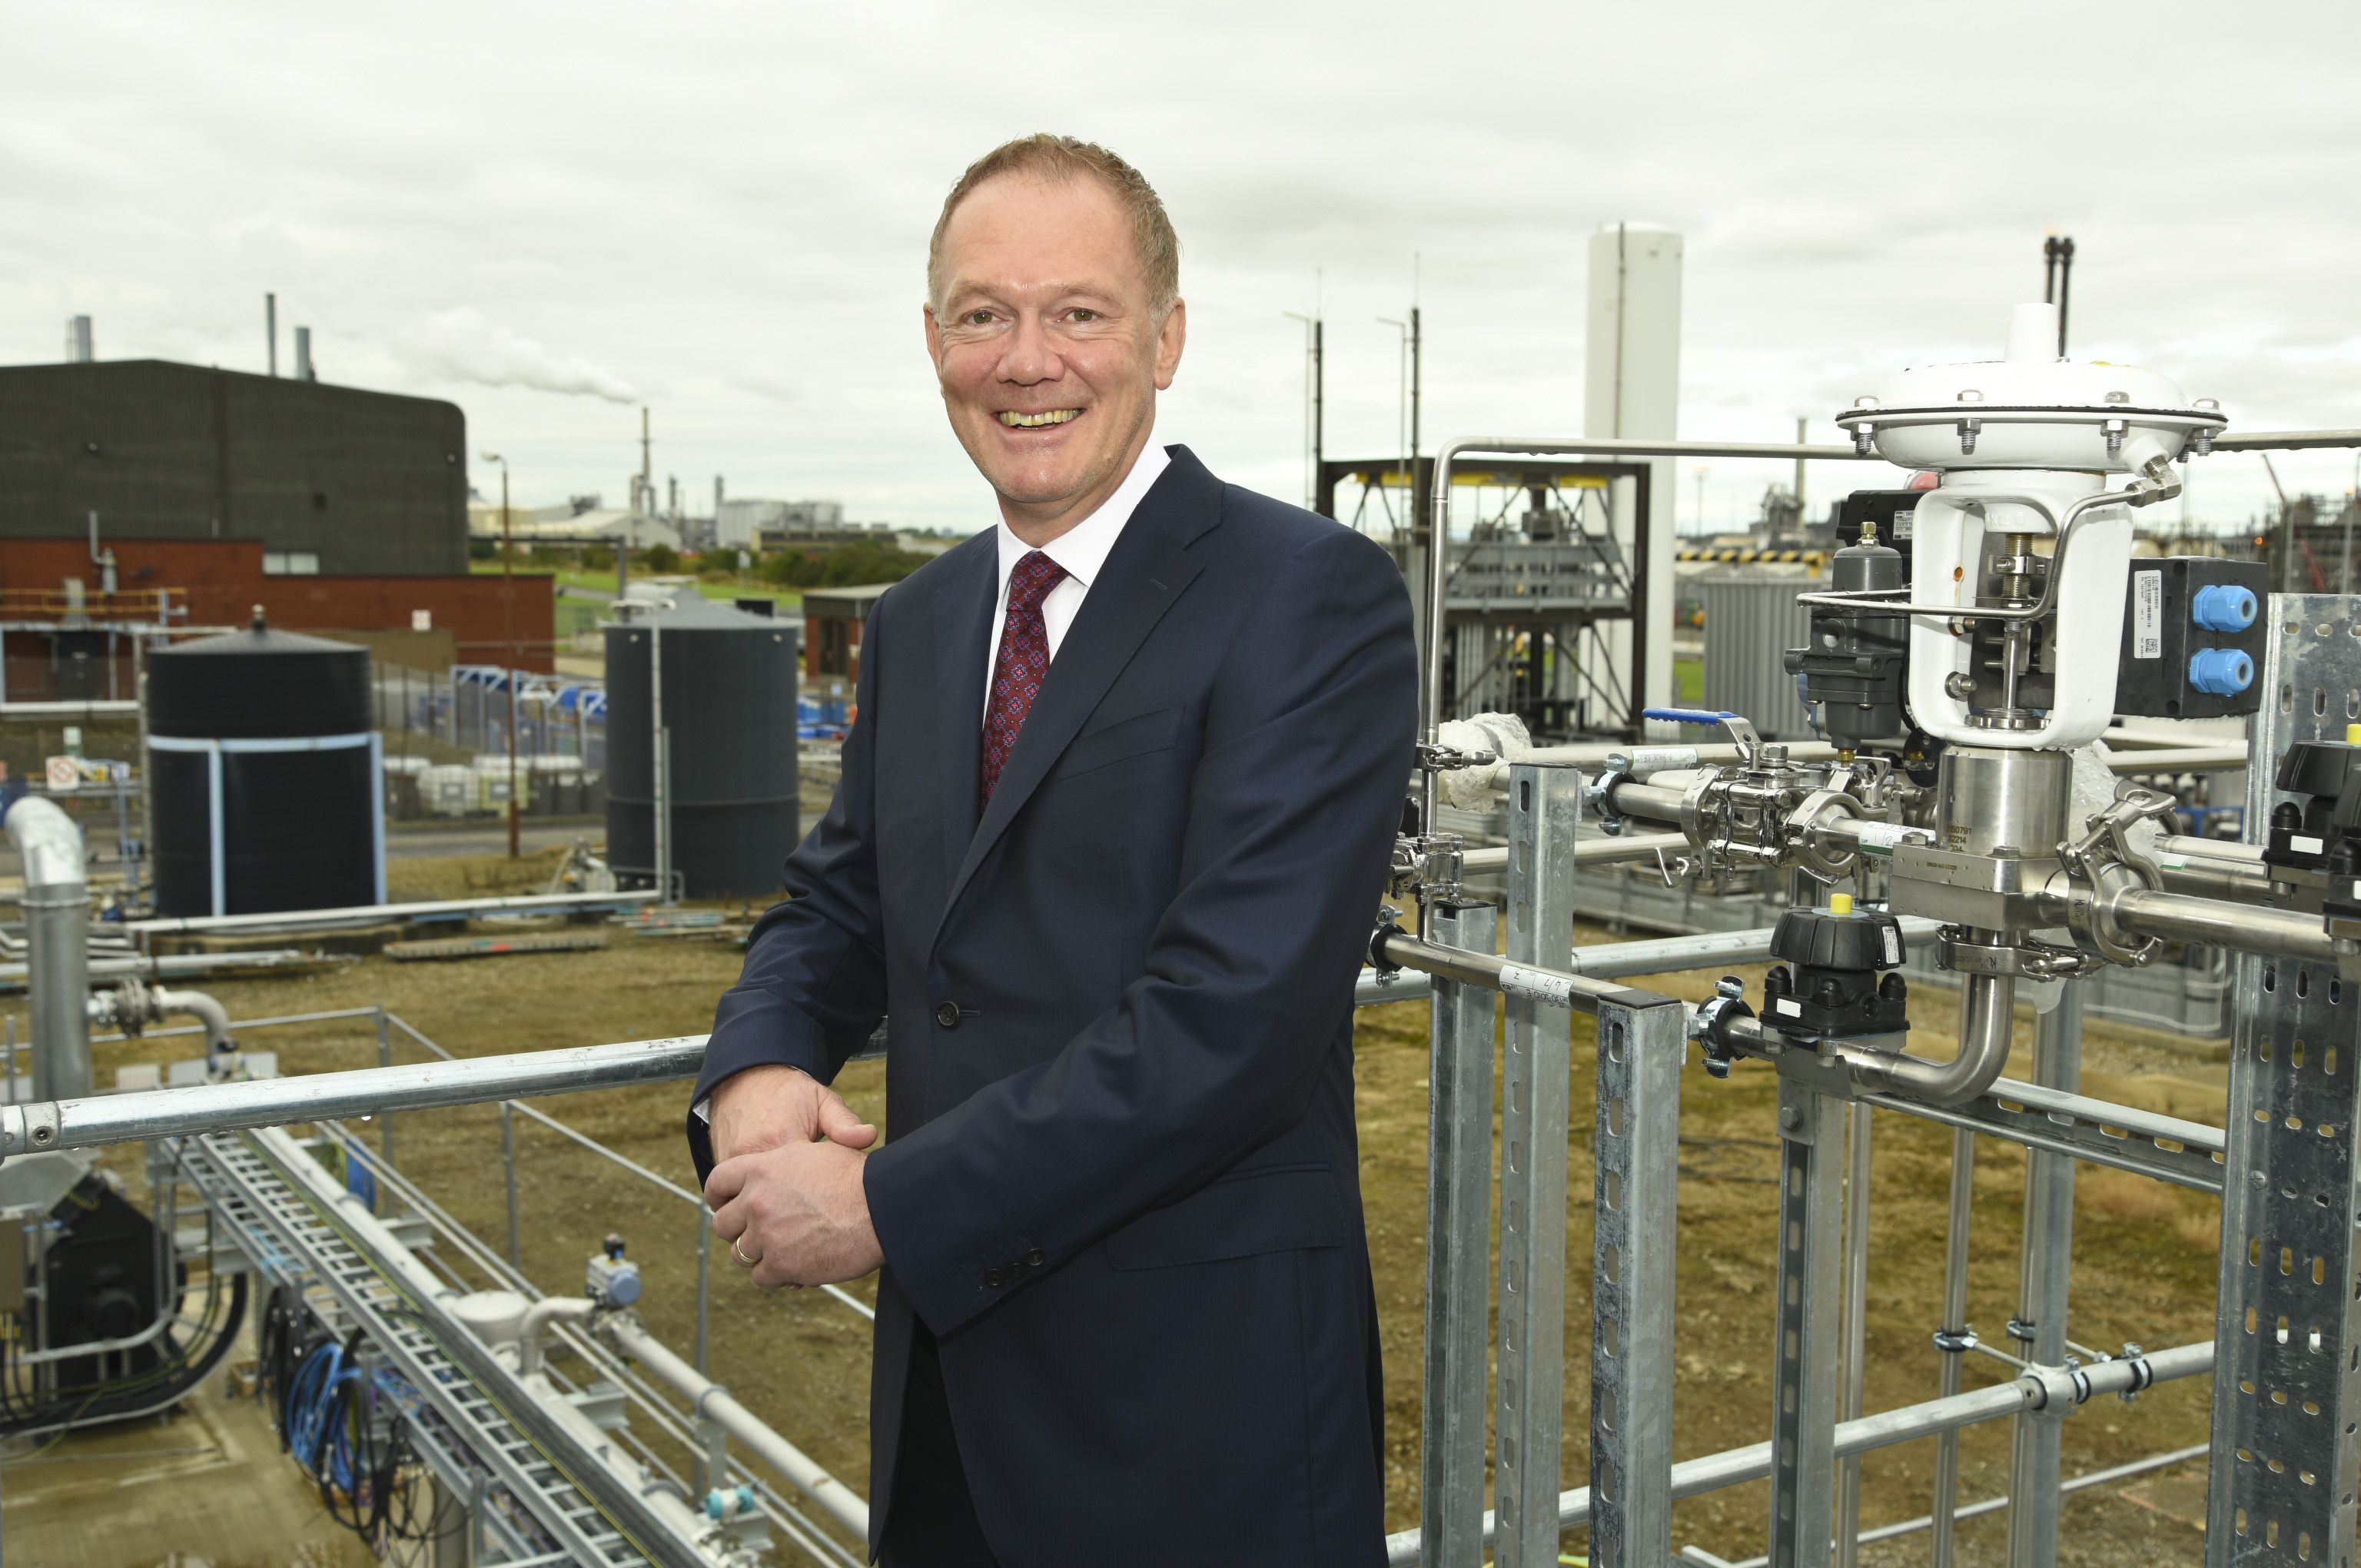 Alan Shaw, Calysta president and CEO, at the Teesside plant where FeedKind is currently produced for trials